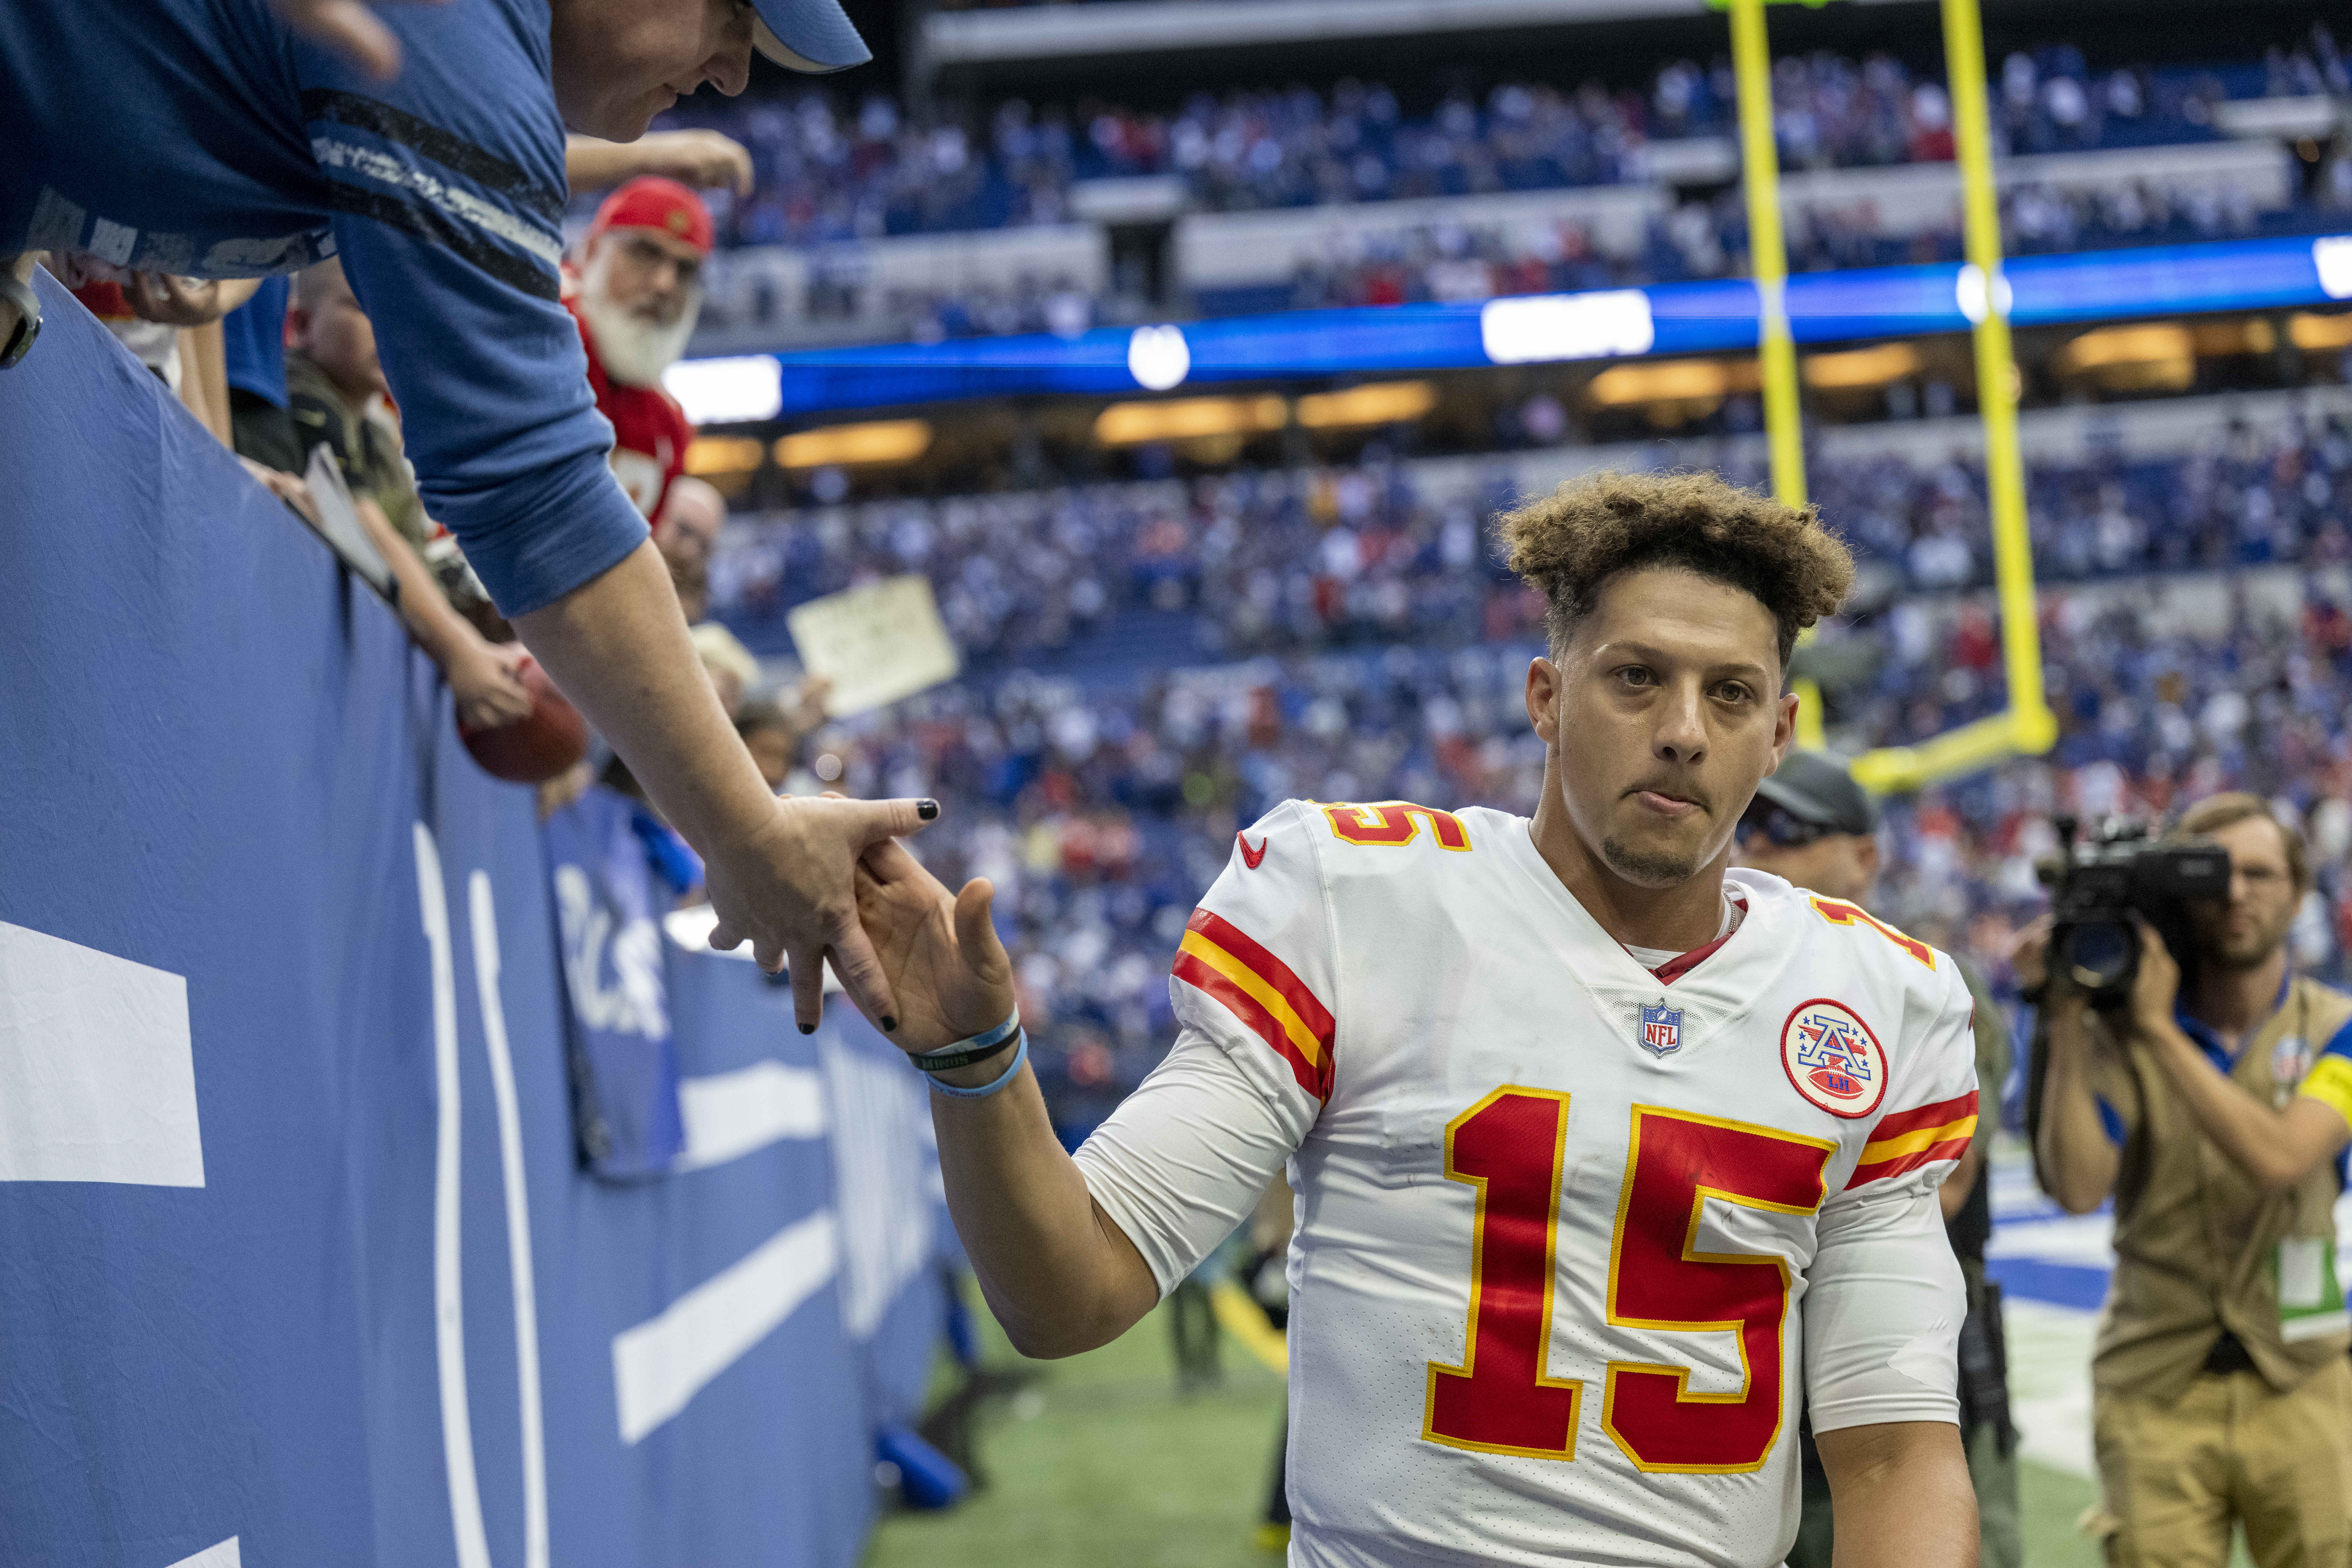 Sportsbooks won big on stunning losses by the Bills and Chiefs, and bettors were sick